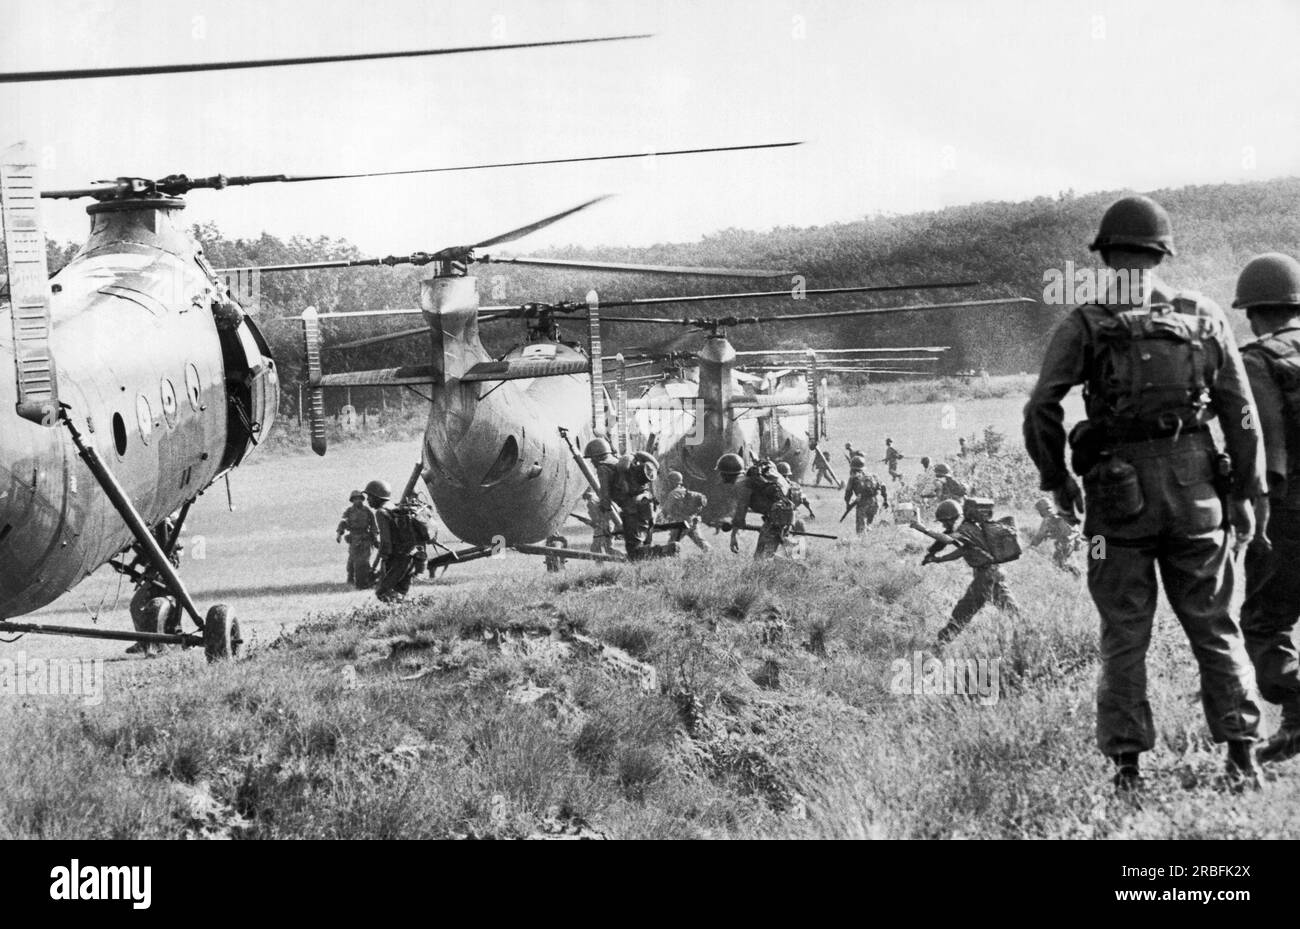 Vietnam:  October 25, 1962 American advisors watch as Vietnamese troops run to board helicopters for an airborne anti Viet Cong operation in the jungles near Saigon. Stock Photo